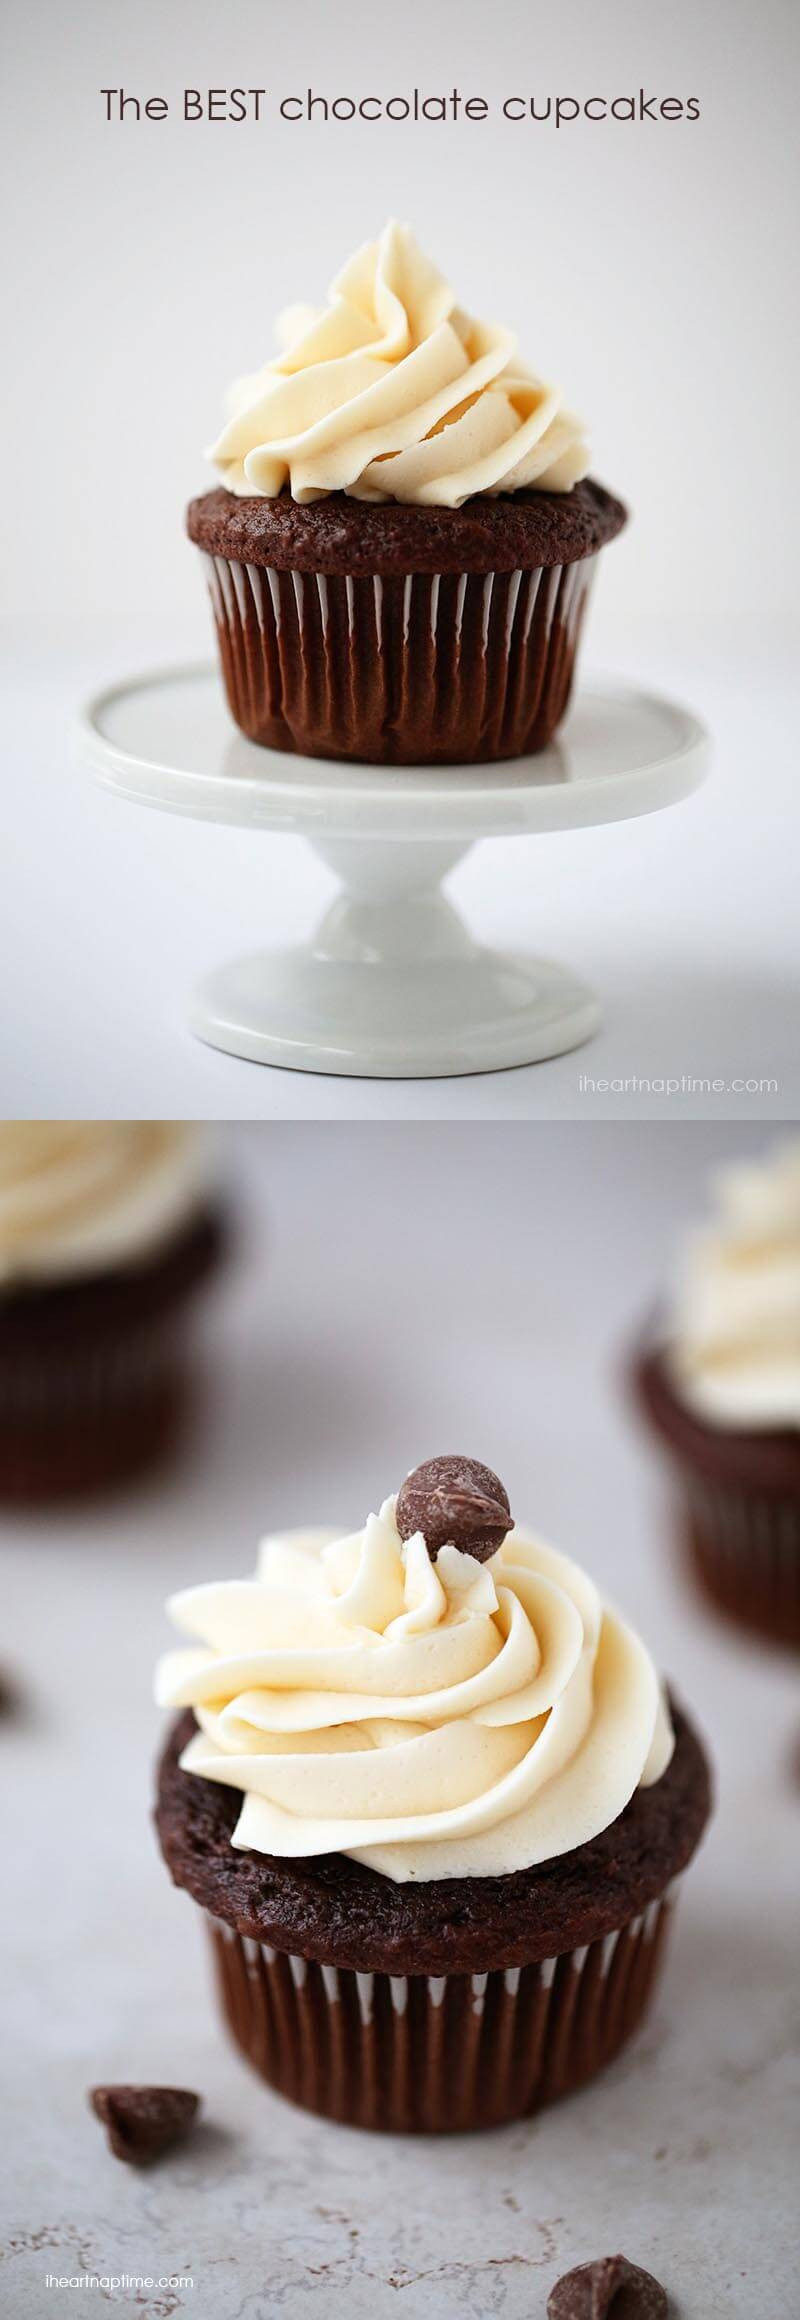 Best Cupcakes Recipe
 The best chocolate cupcakes ever I Heart Nap Time